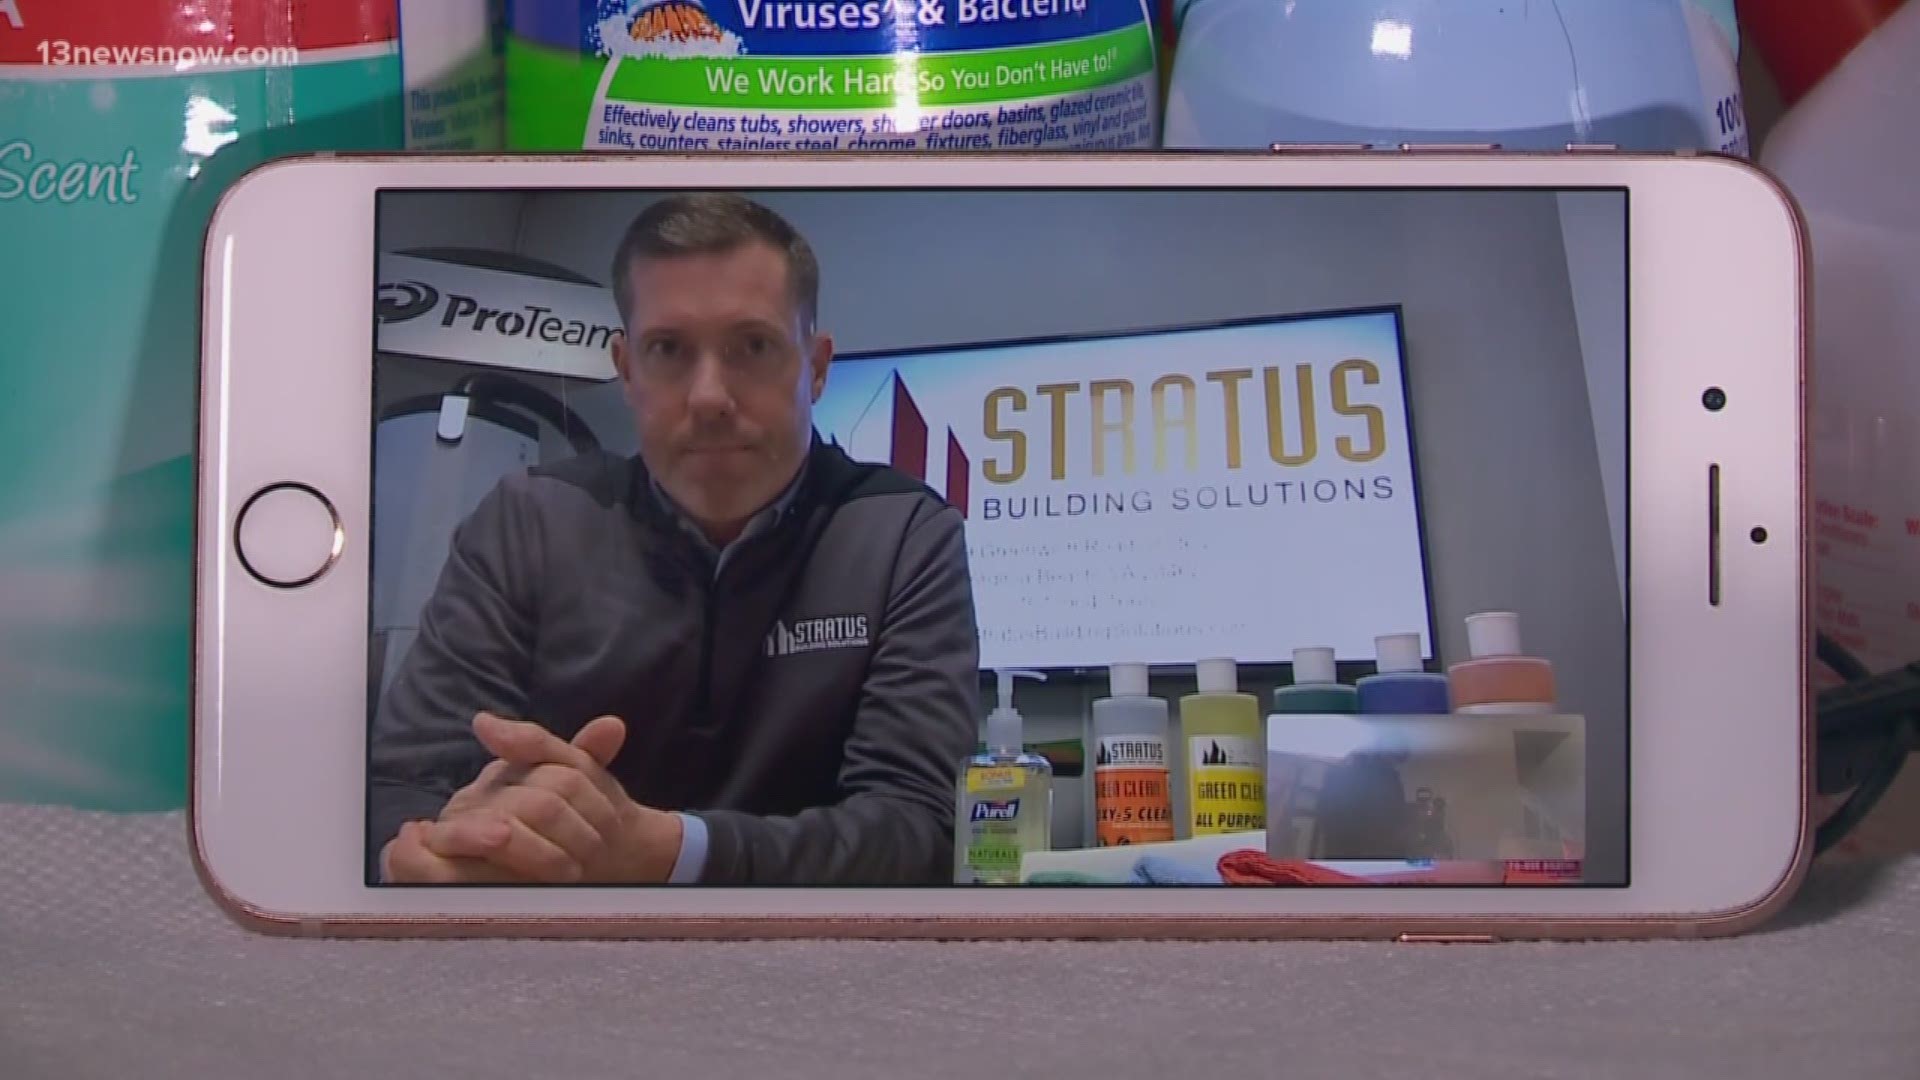 Stratus Building Solutions has been busy cleaning offices in the area, and its Virginia Beach location owner has tips for people working from home.